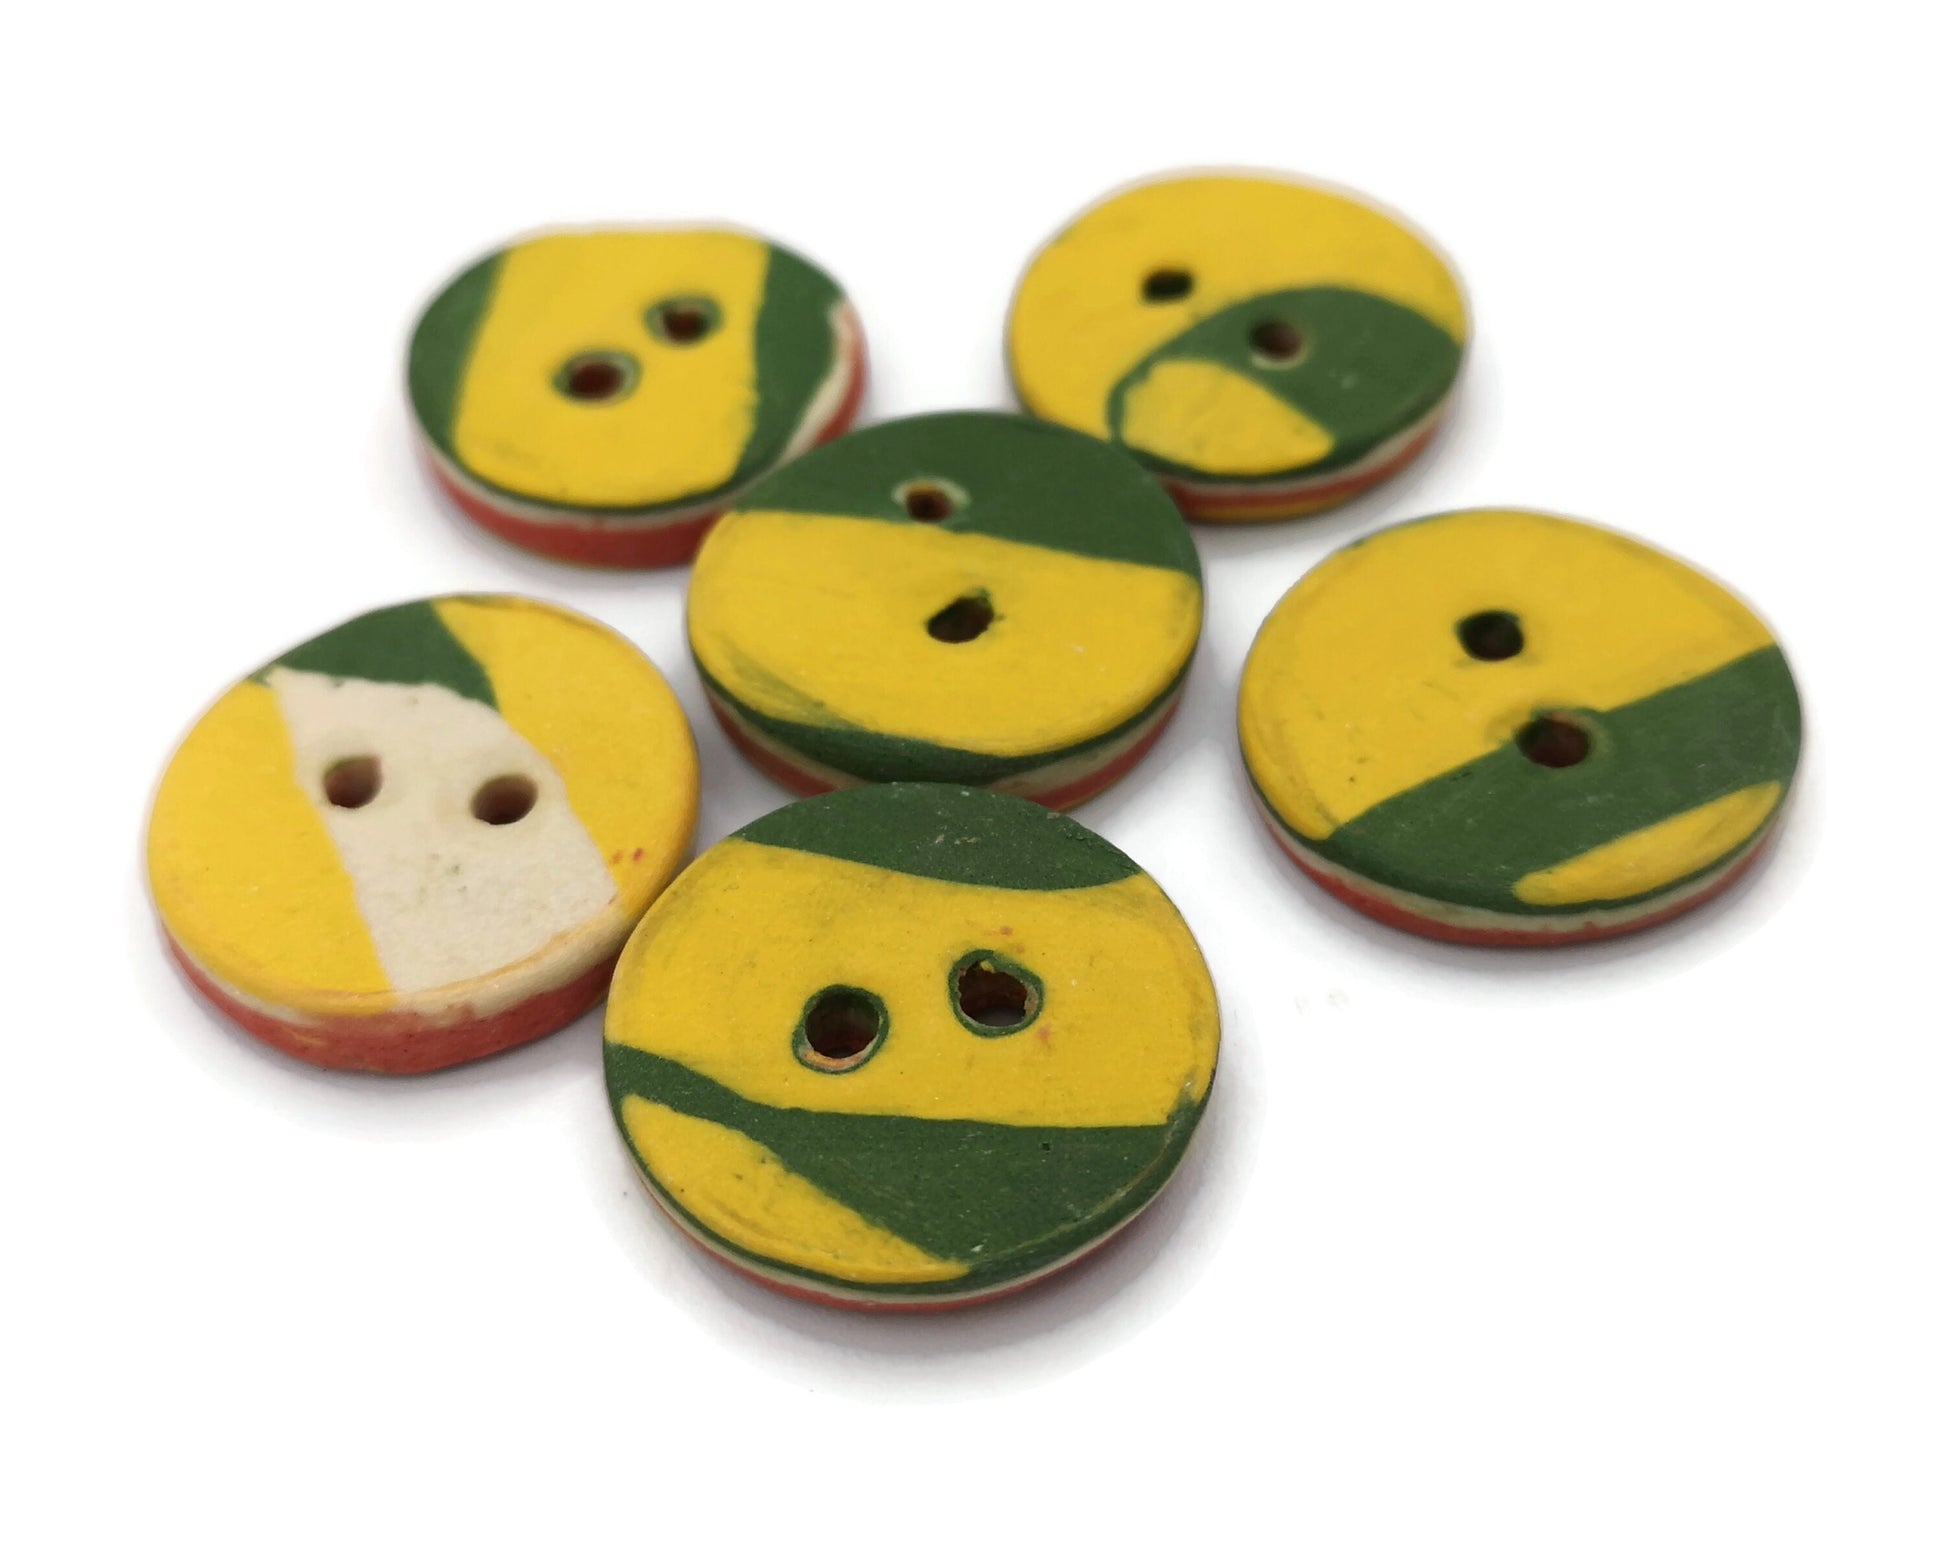 6 Pcs Handmade Ceramic Sewing Buttons, Coat Buttons Strange And Unusual, Jewelry Making Buttons Cute Best Sellers Sewing Supplies And Notion - Ceramica Ana Rafael